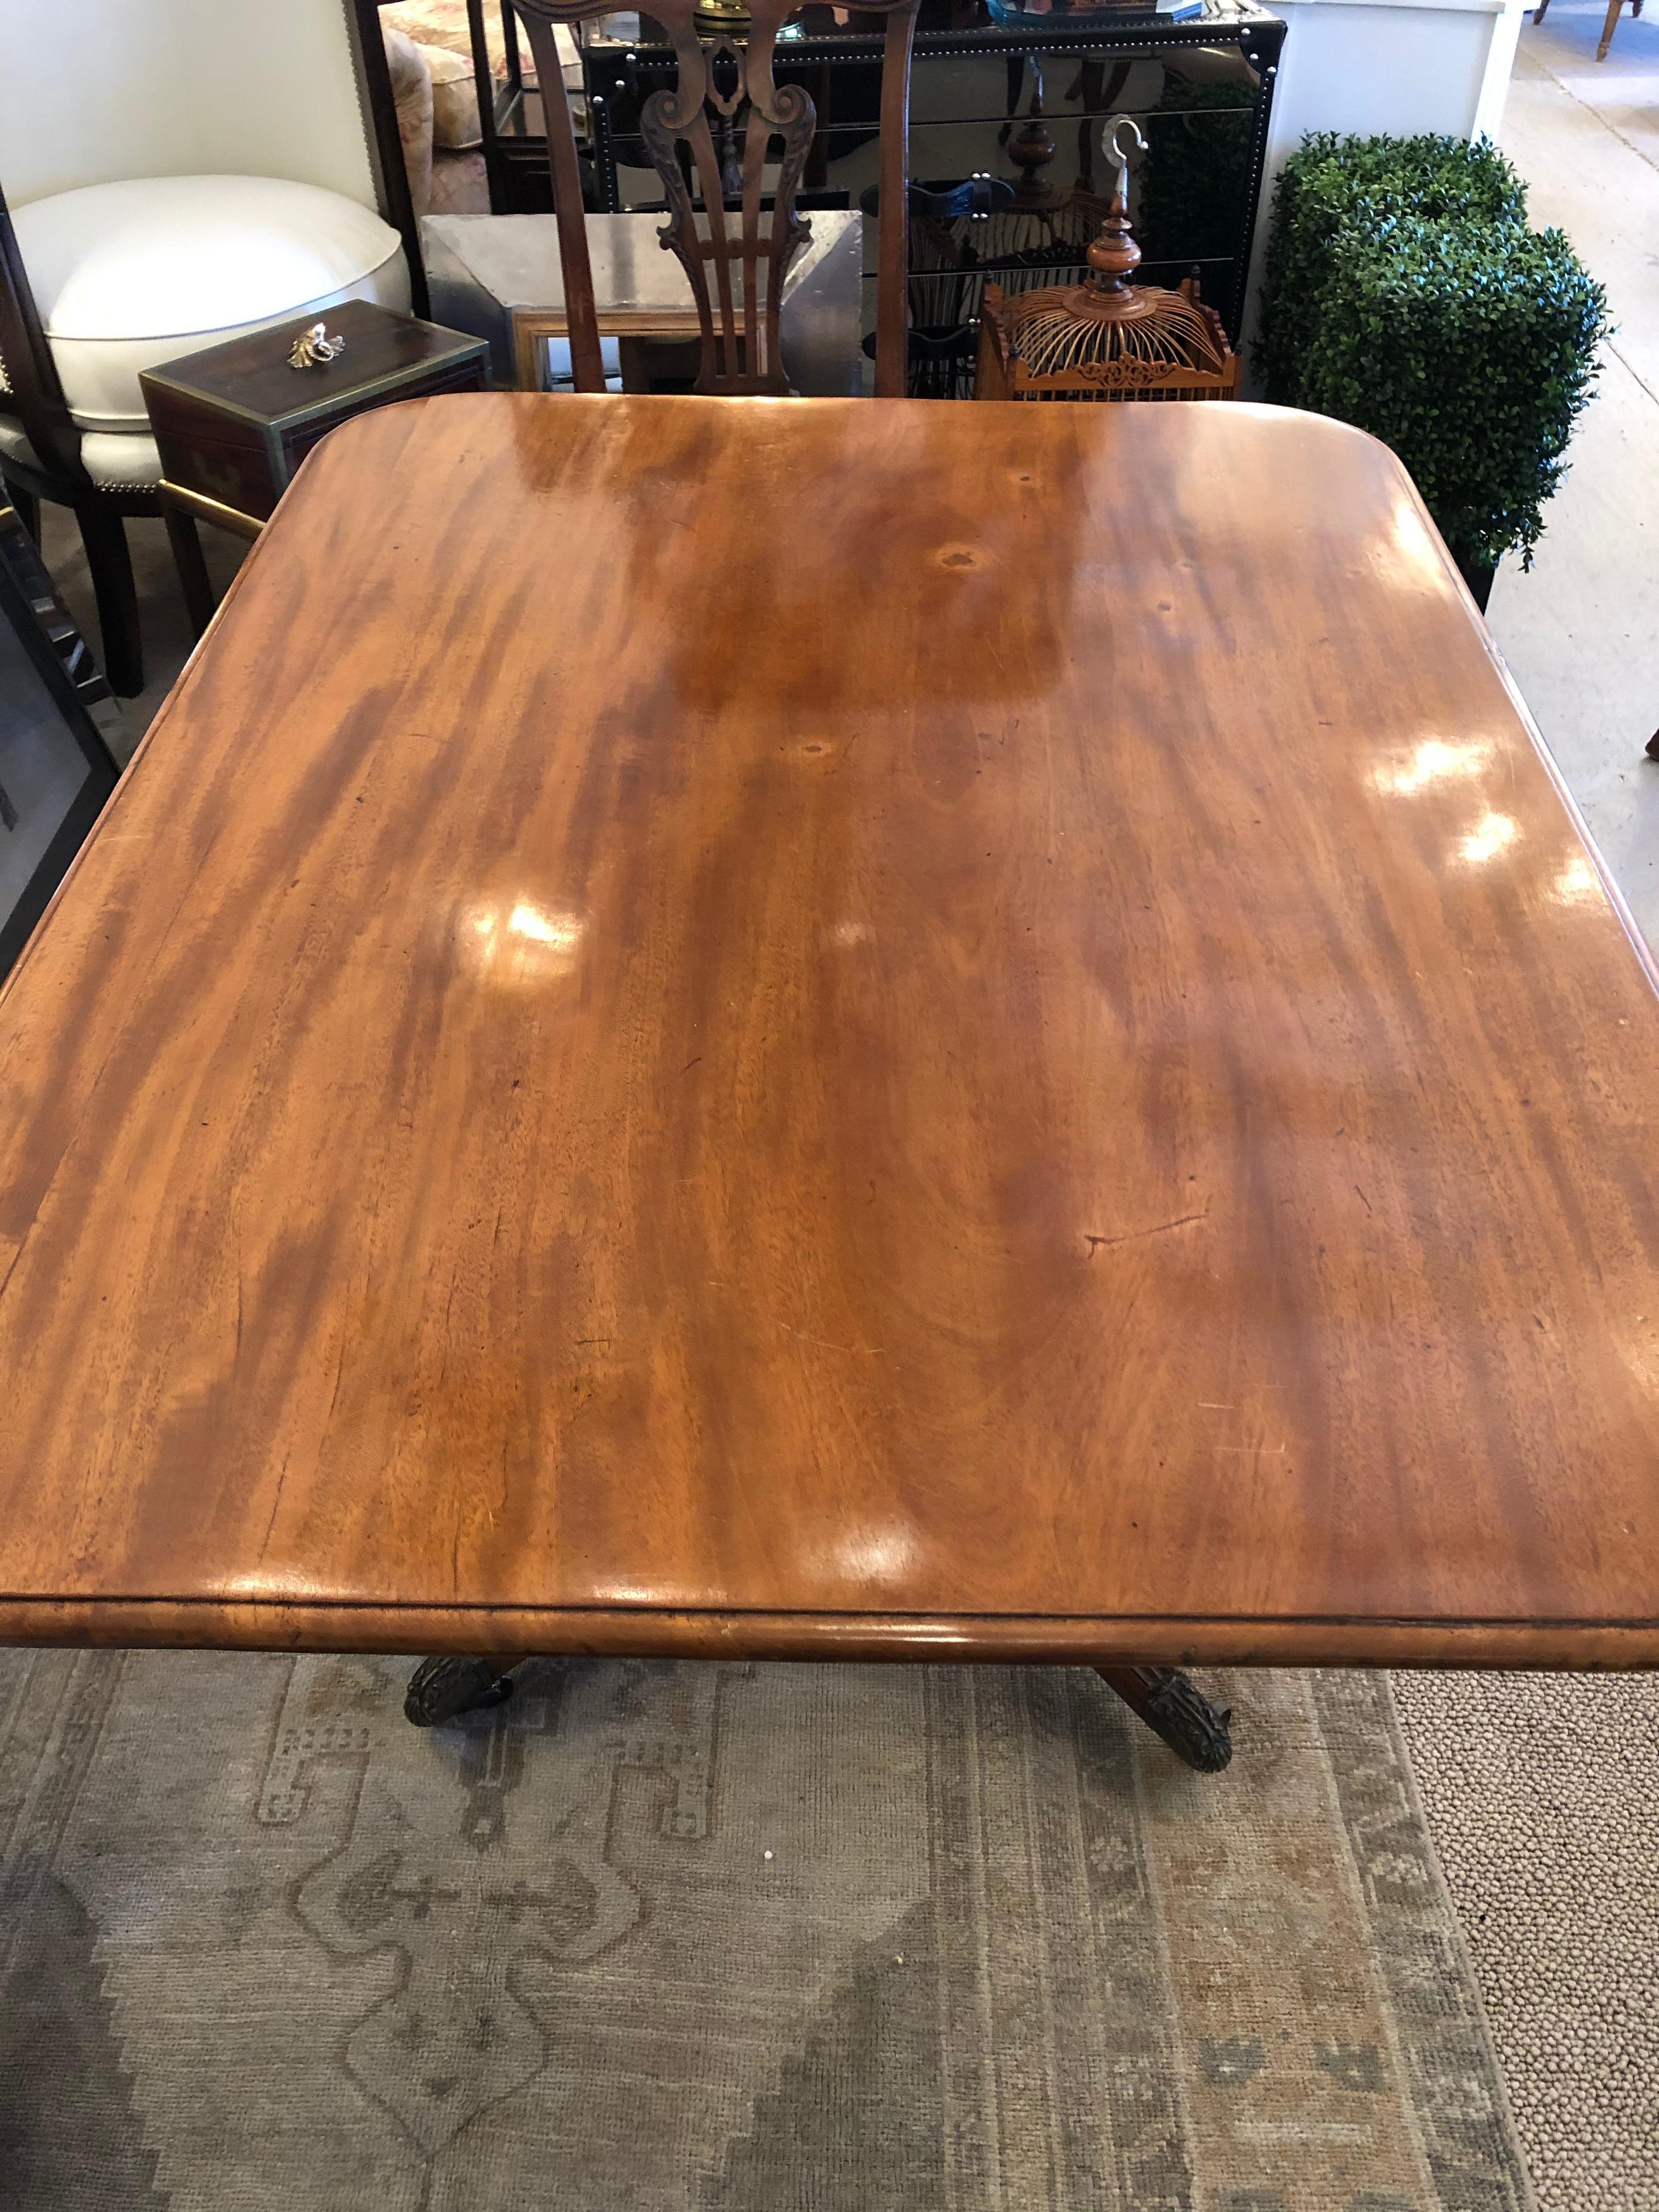 Refined antique faded mahogany rectangular small dining table having turned pedestal base on 4 splayed legs with casters. Wonderful as an elegant breakfast table or small dining table.
When top is in upright vertical position, 61.5 H.